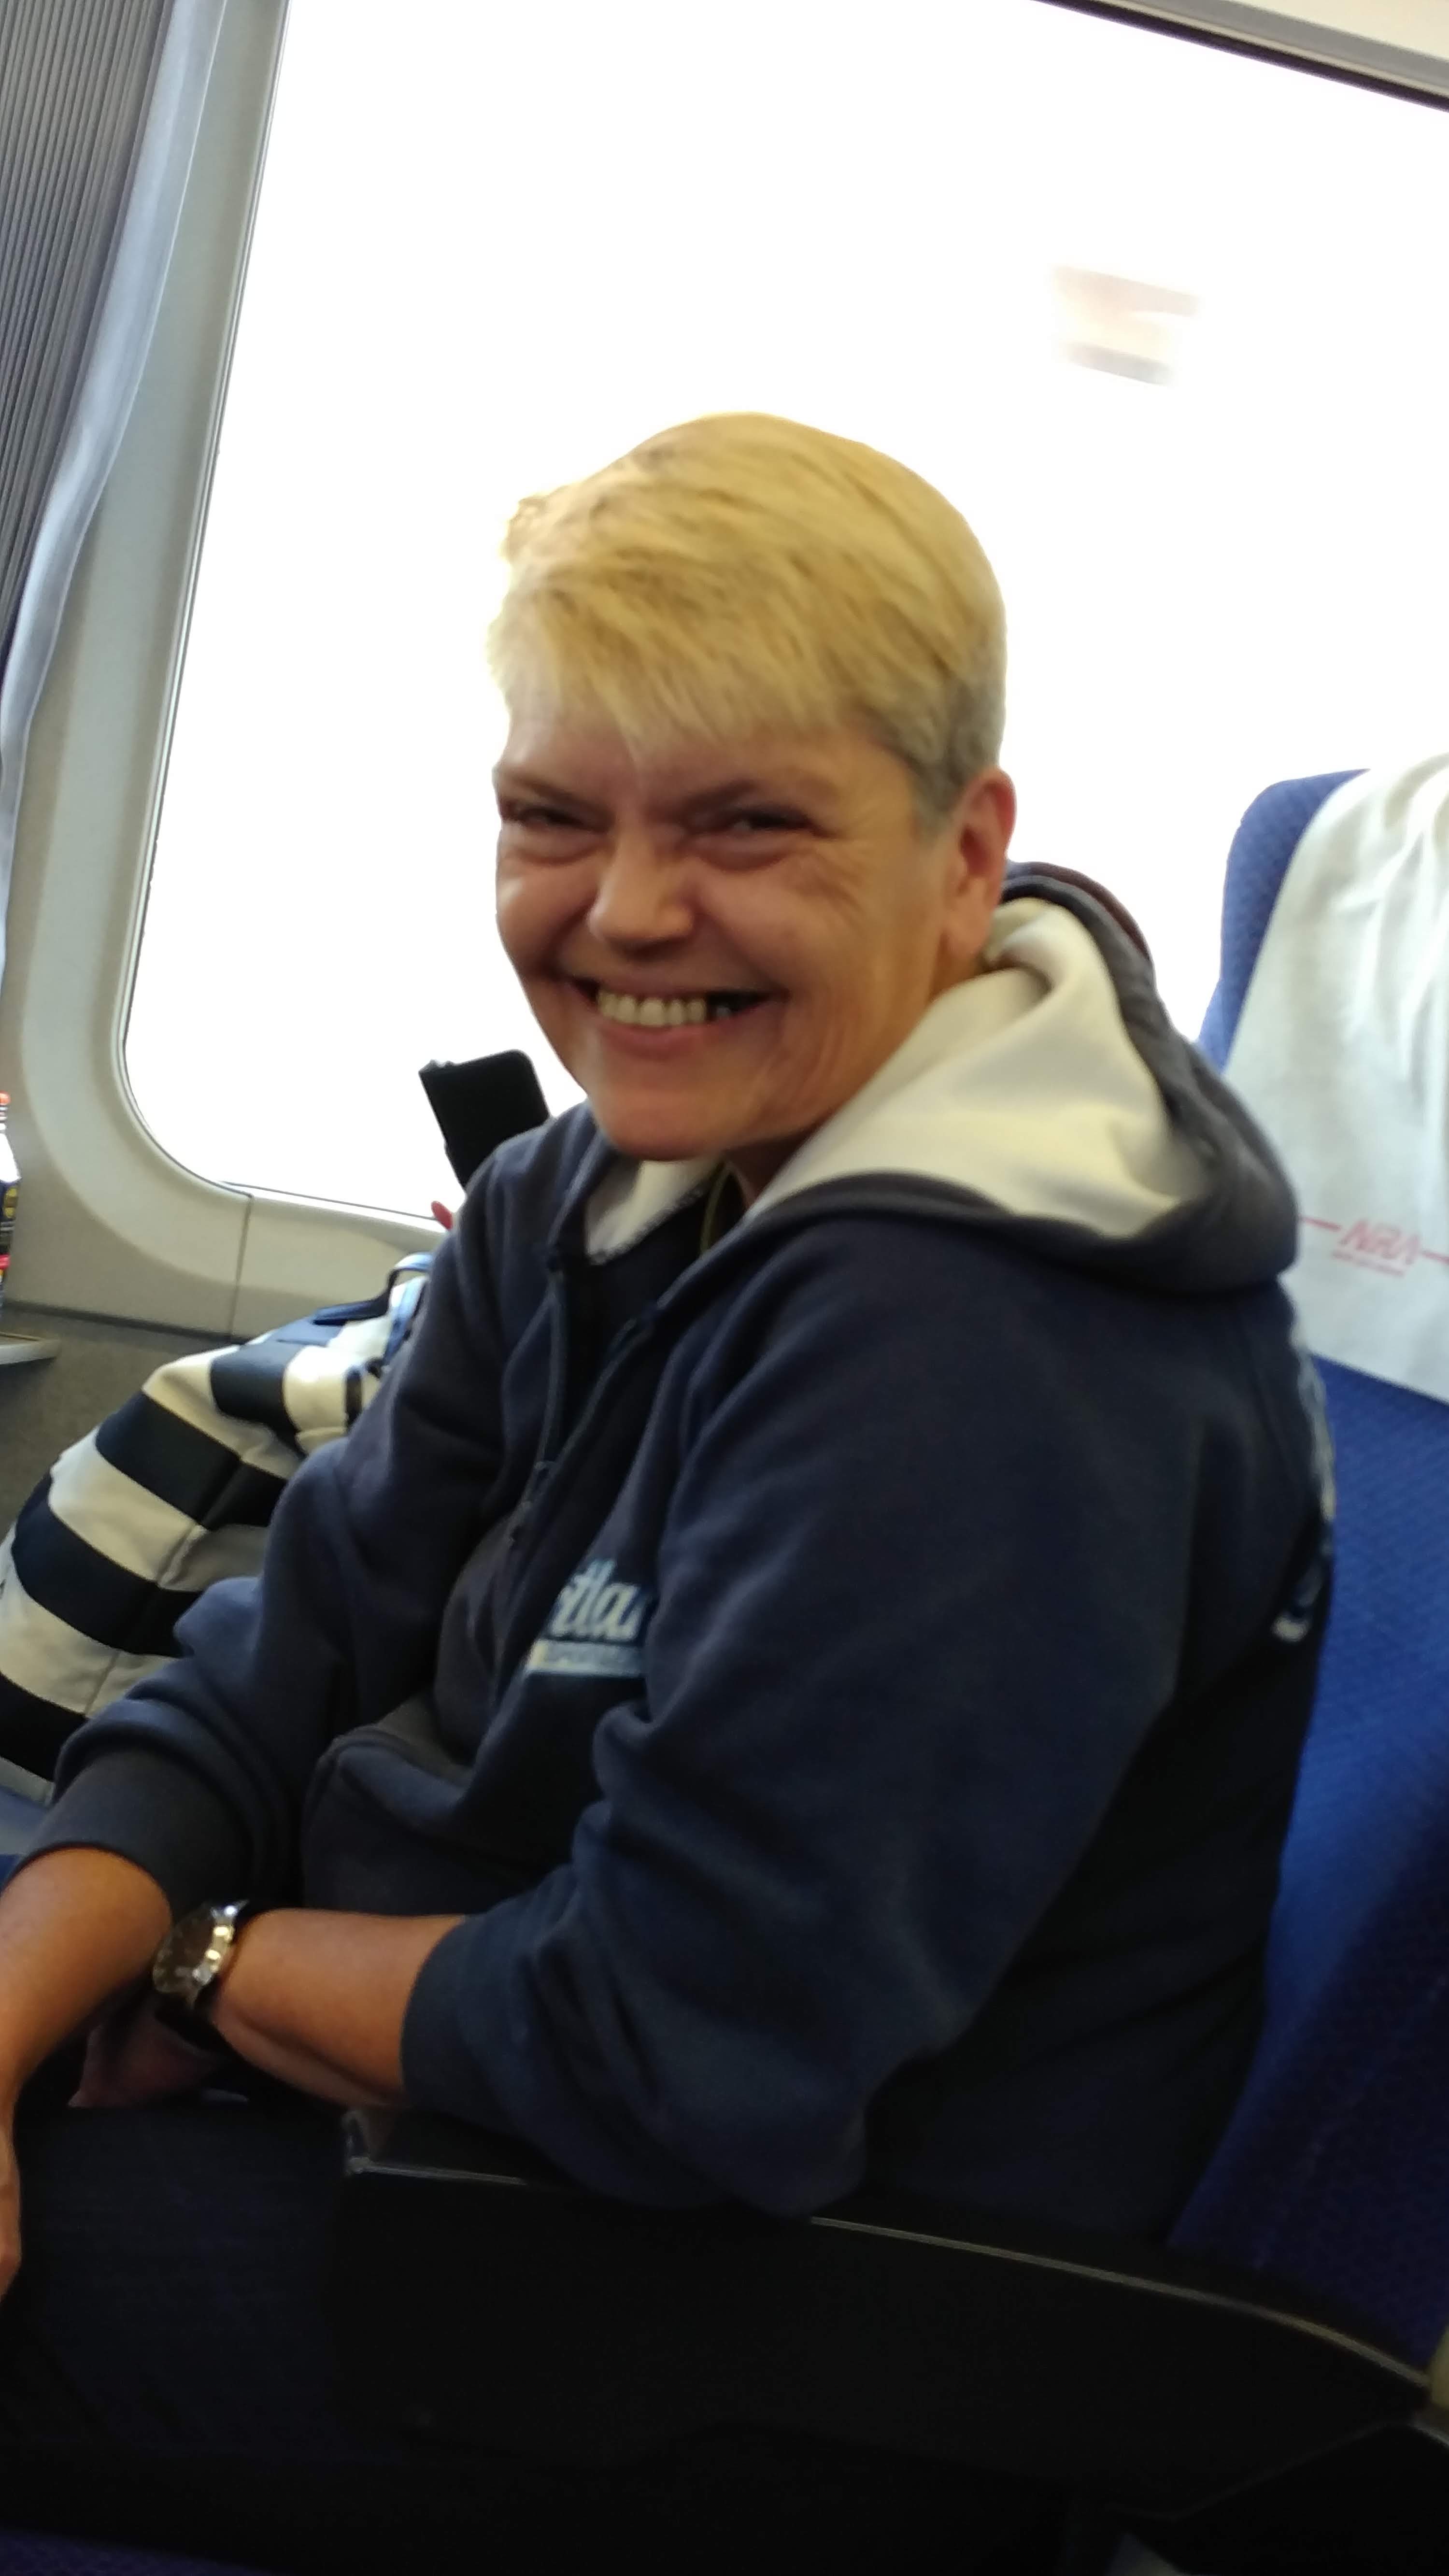 A blonde woman wearing a navy blue hoodie smiles in her seat